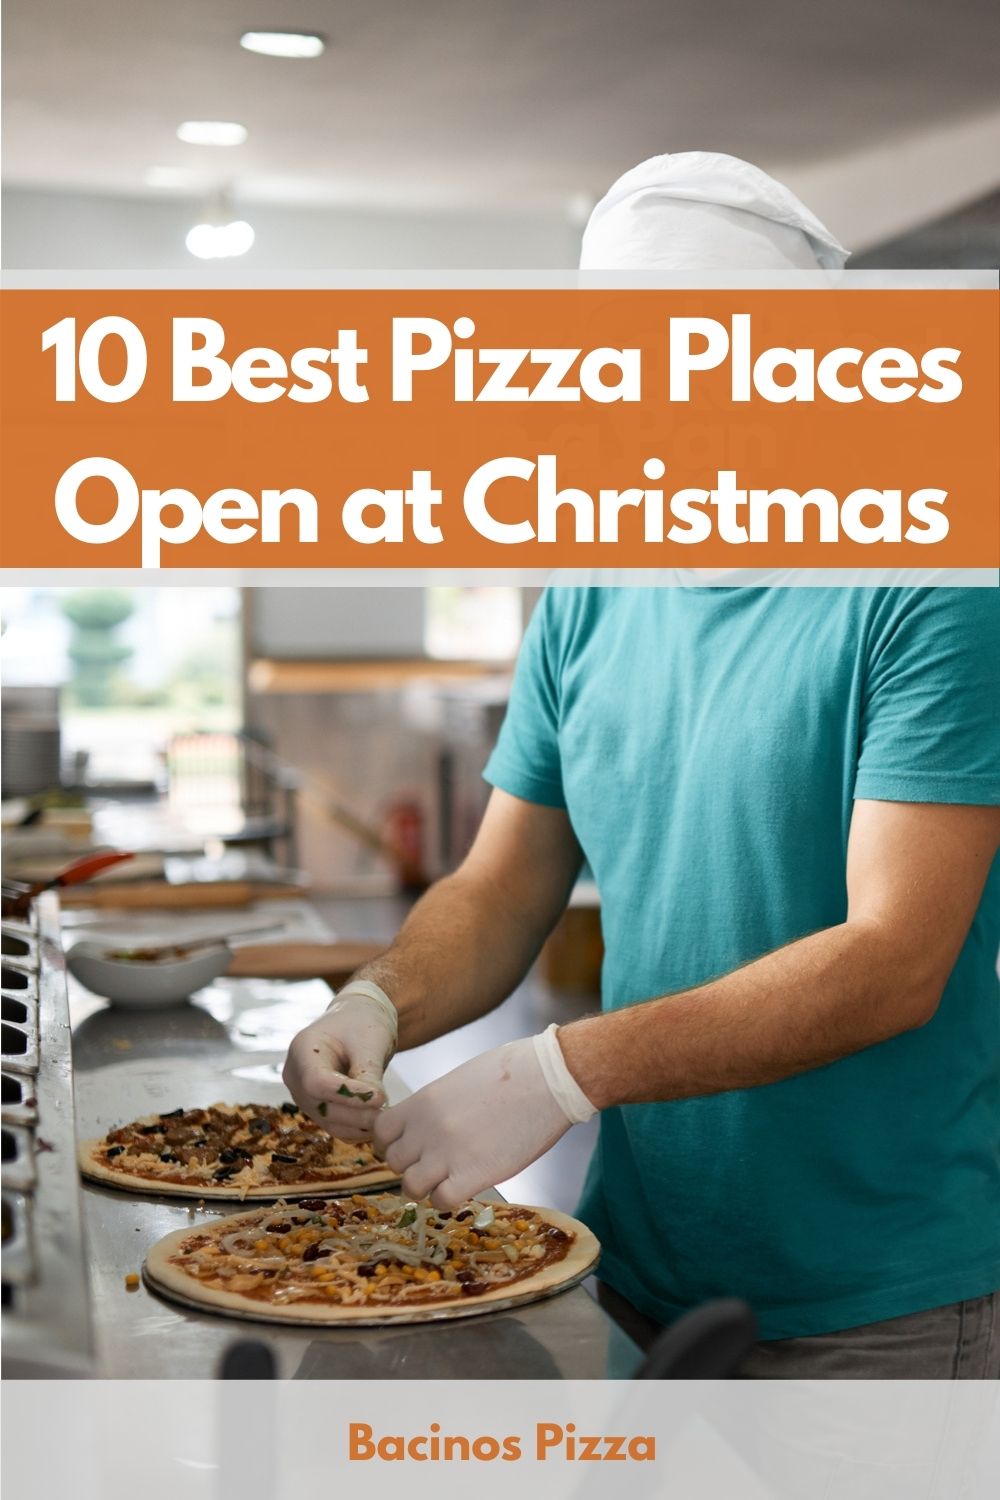 10 Best Pizza Places Open at Christmas pin 2